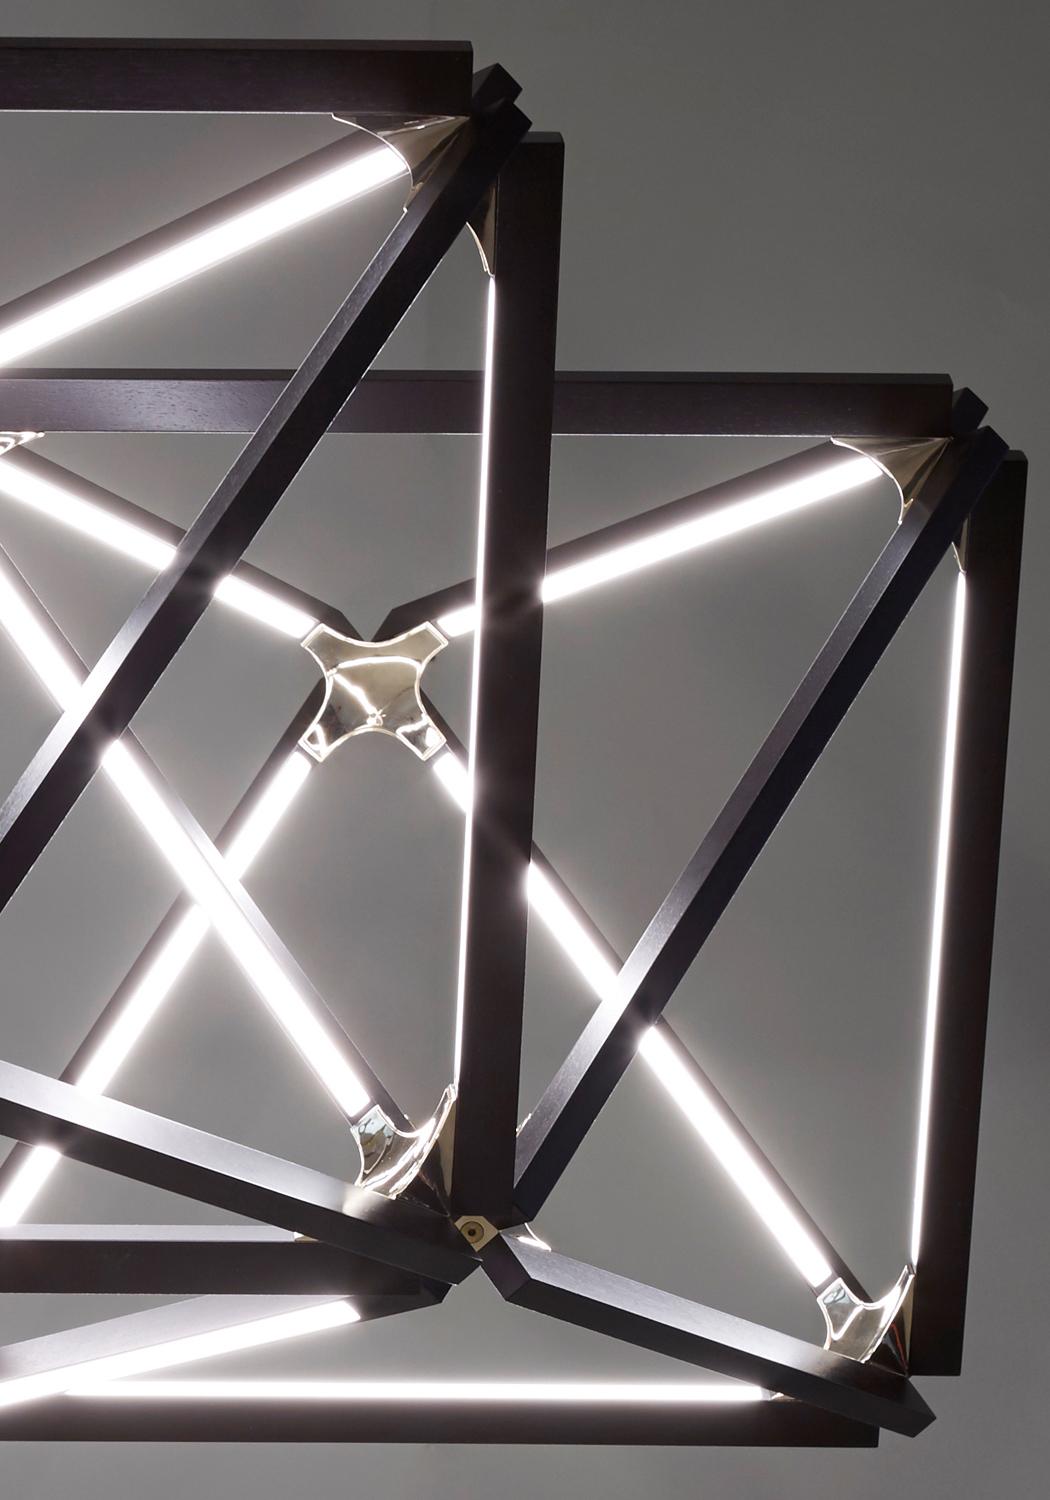 The triple X chandelier by Stickbulb was designed by Rux in 2015 and is made in New York City, USA.

The X collection transcends the line between lighting and furniture. It includes illuminated pieces that can function as tables, chandeliers, or